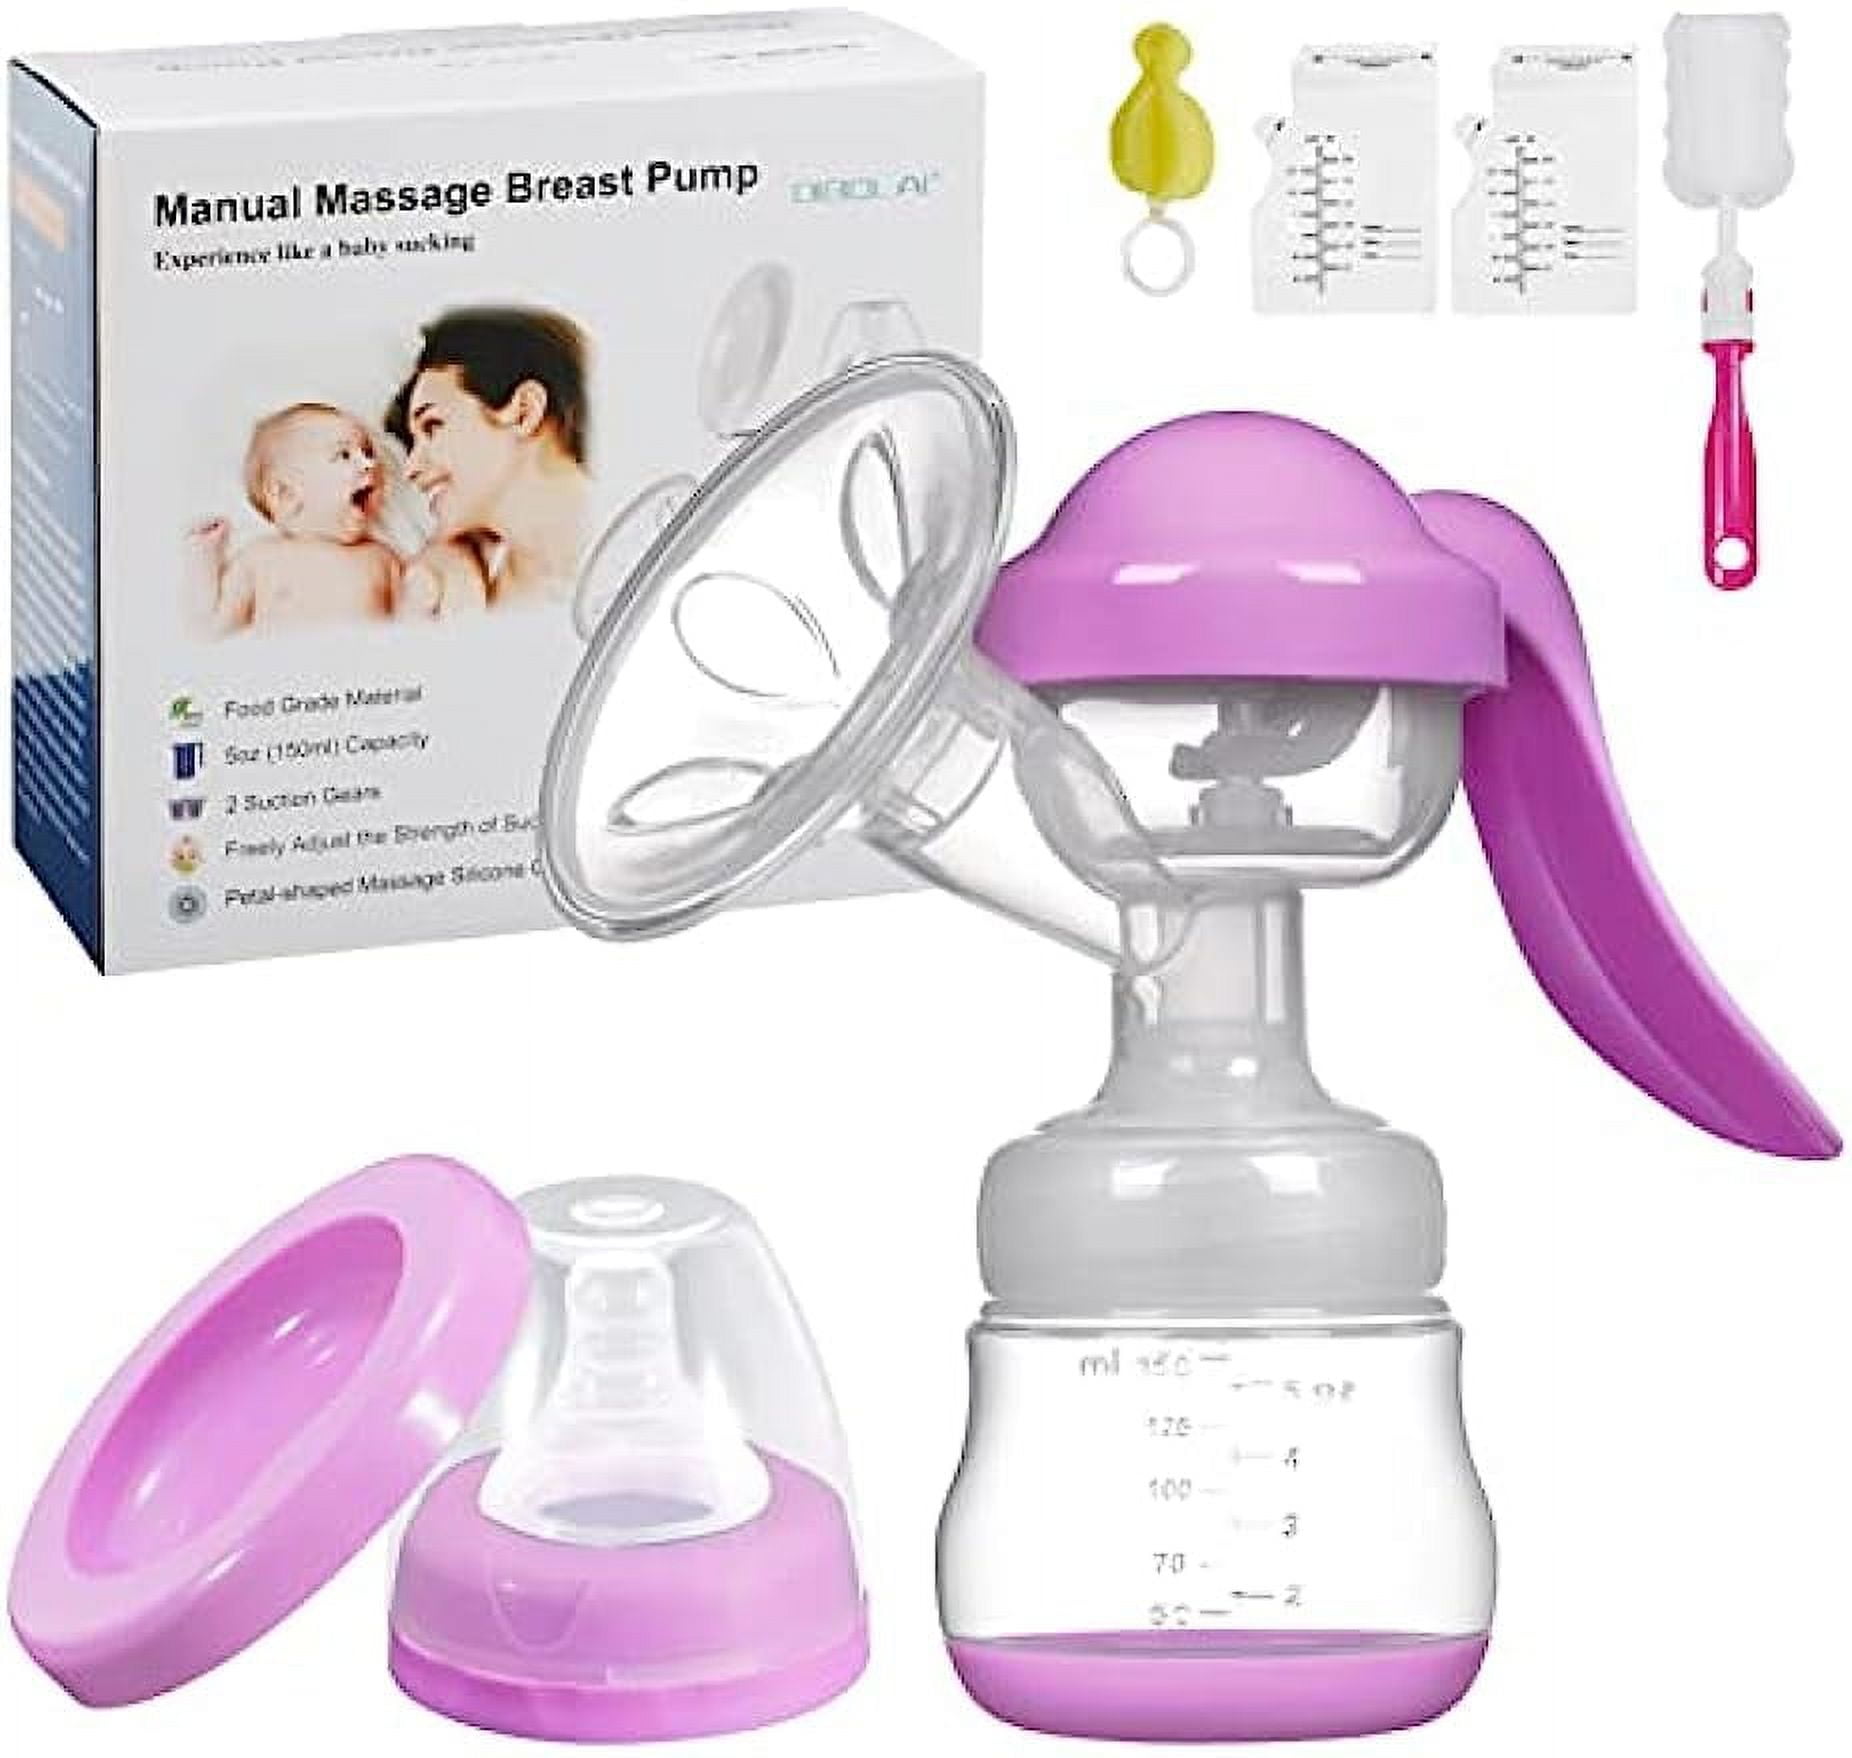 Manual Breast Pump, Silicone Hand Pump for Breastfeeding, Small ...